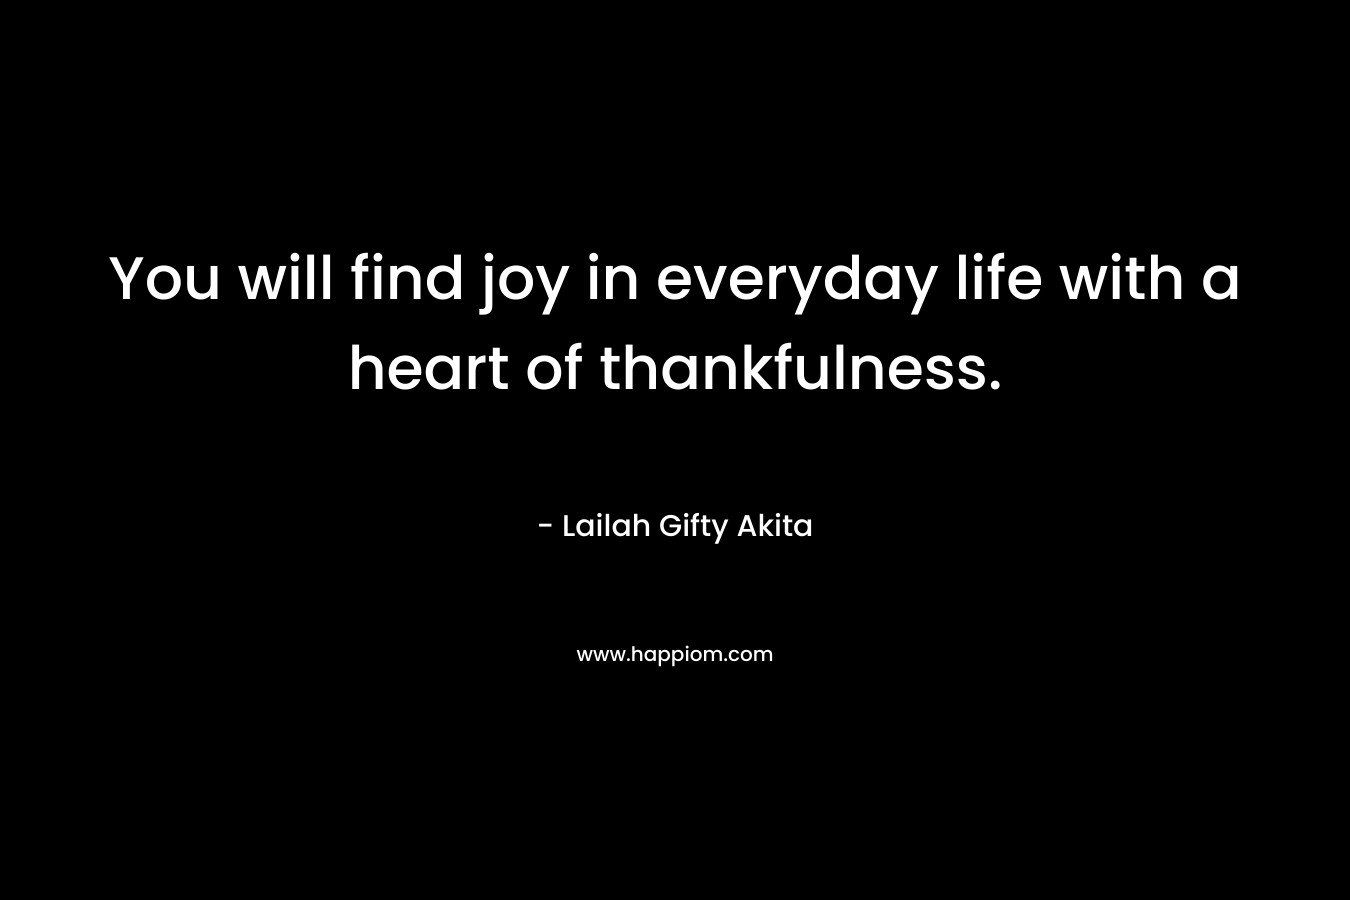 You will find joy in everyday life with a heart of thankfulness.